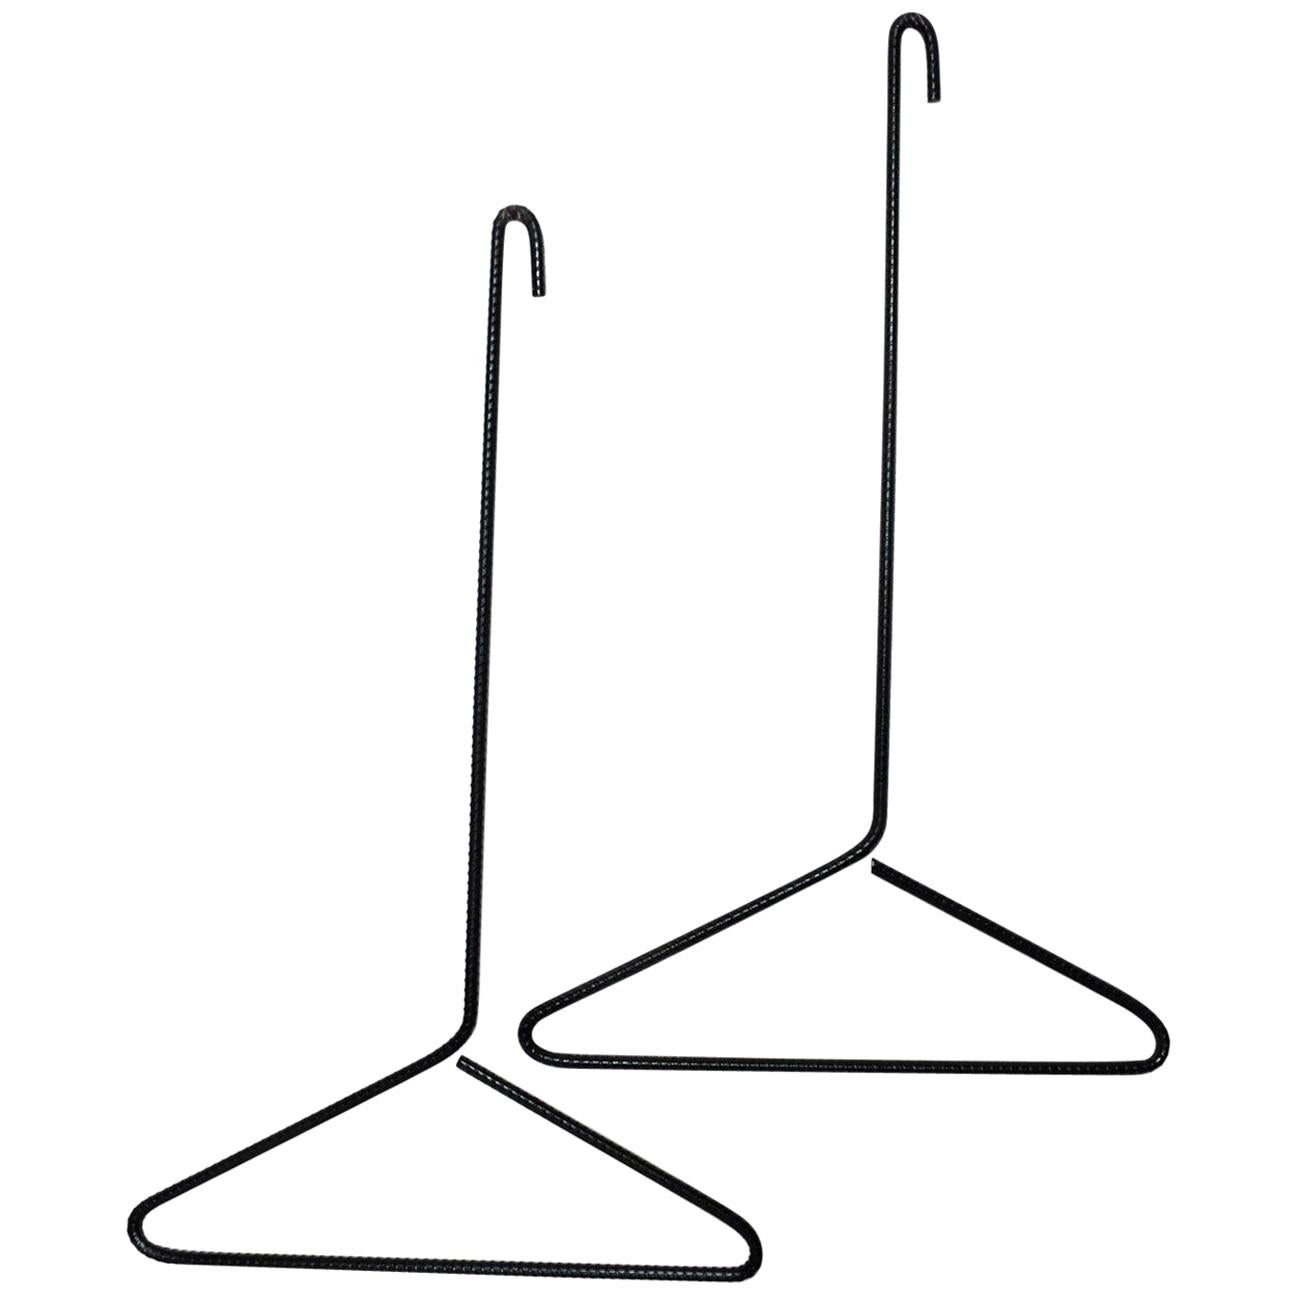 Modern Contemporary Sculptural Iron Coat Hangers by Ambianic